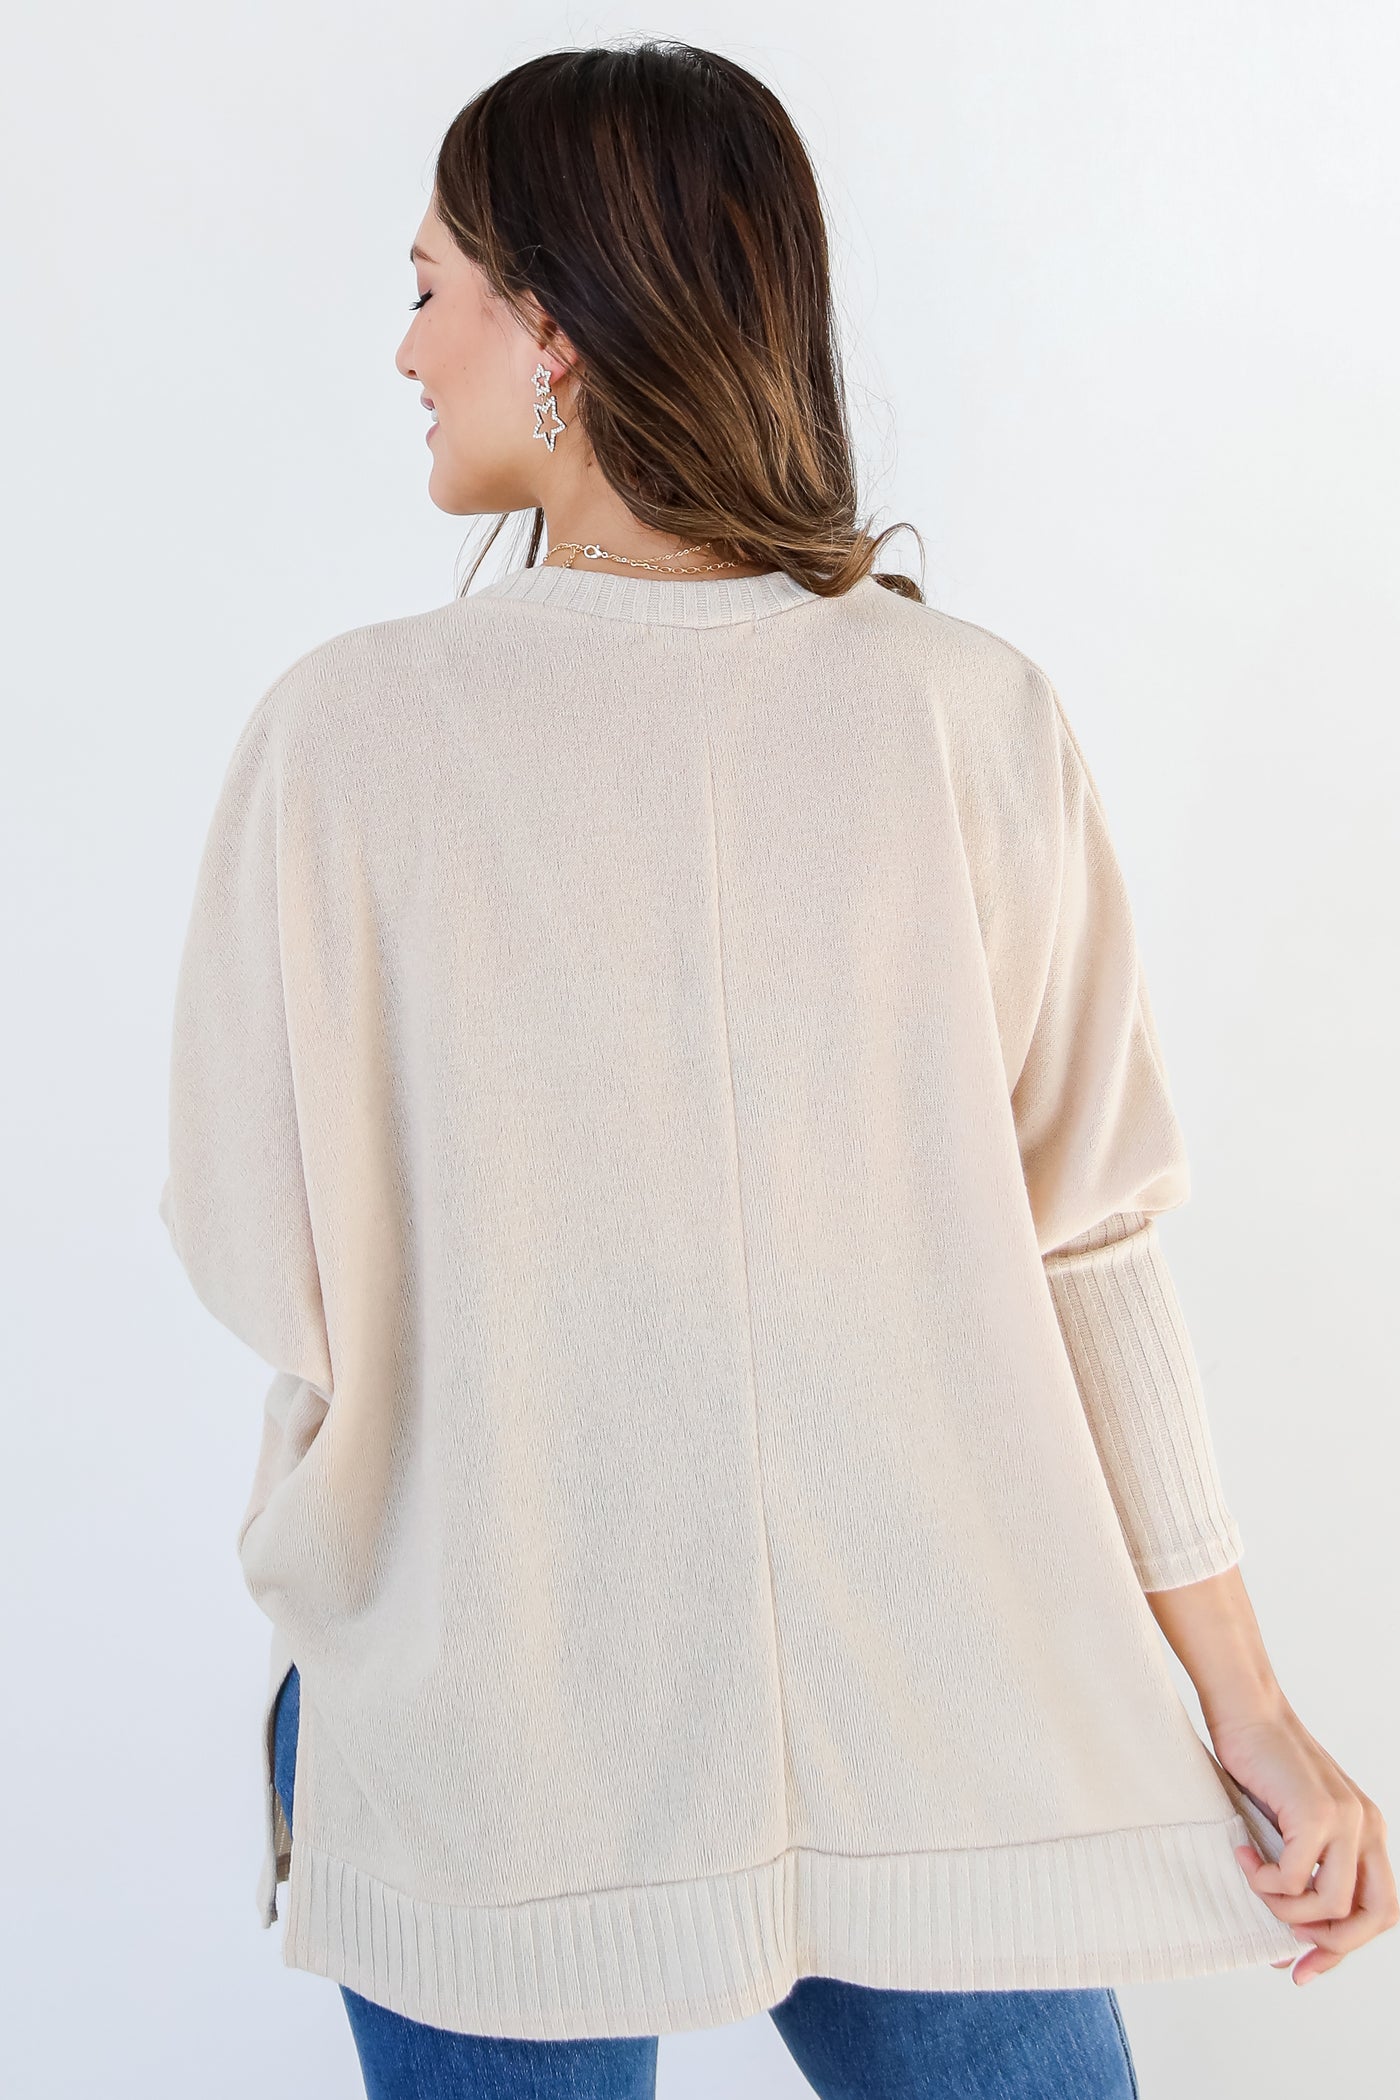 ivory Knit Top back view